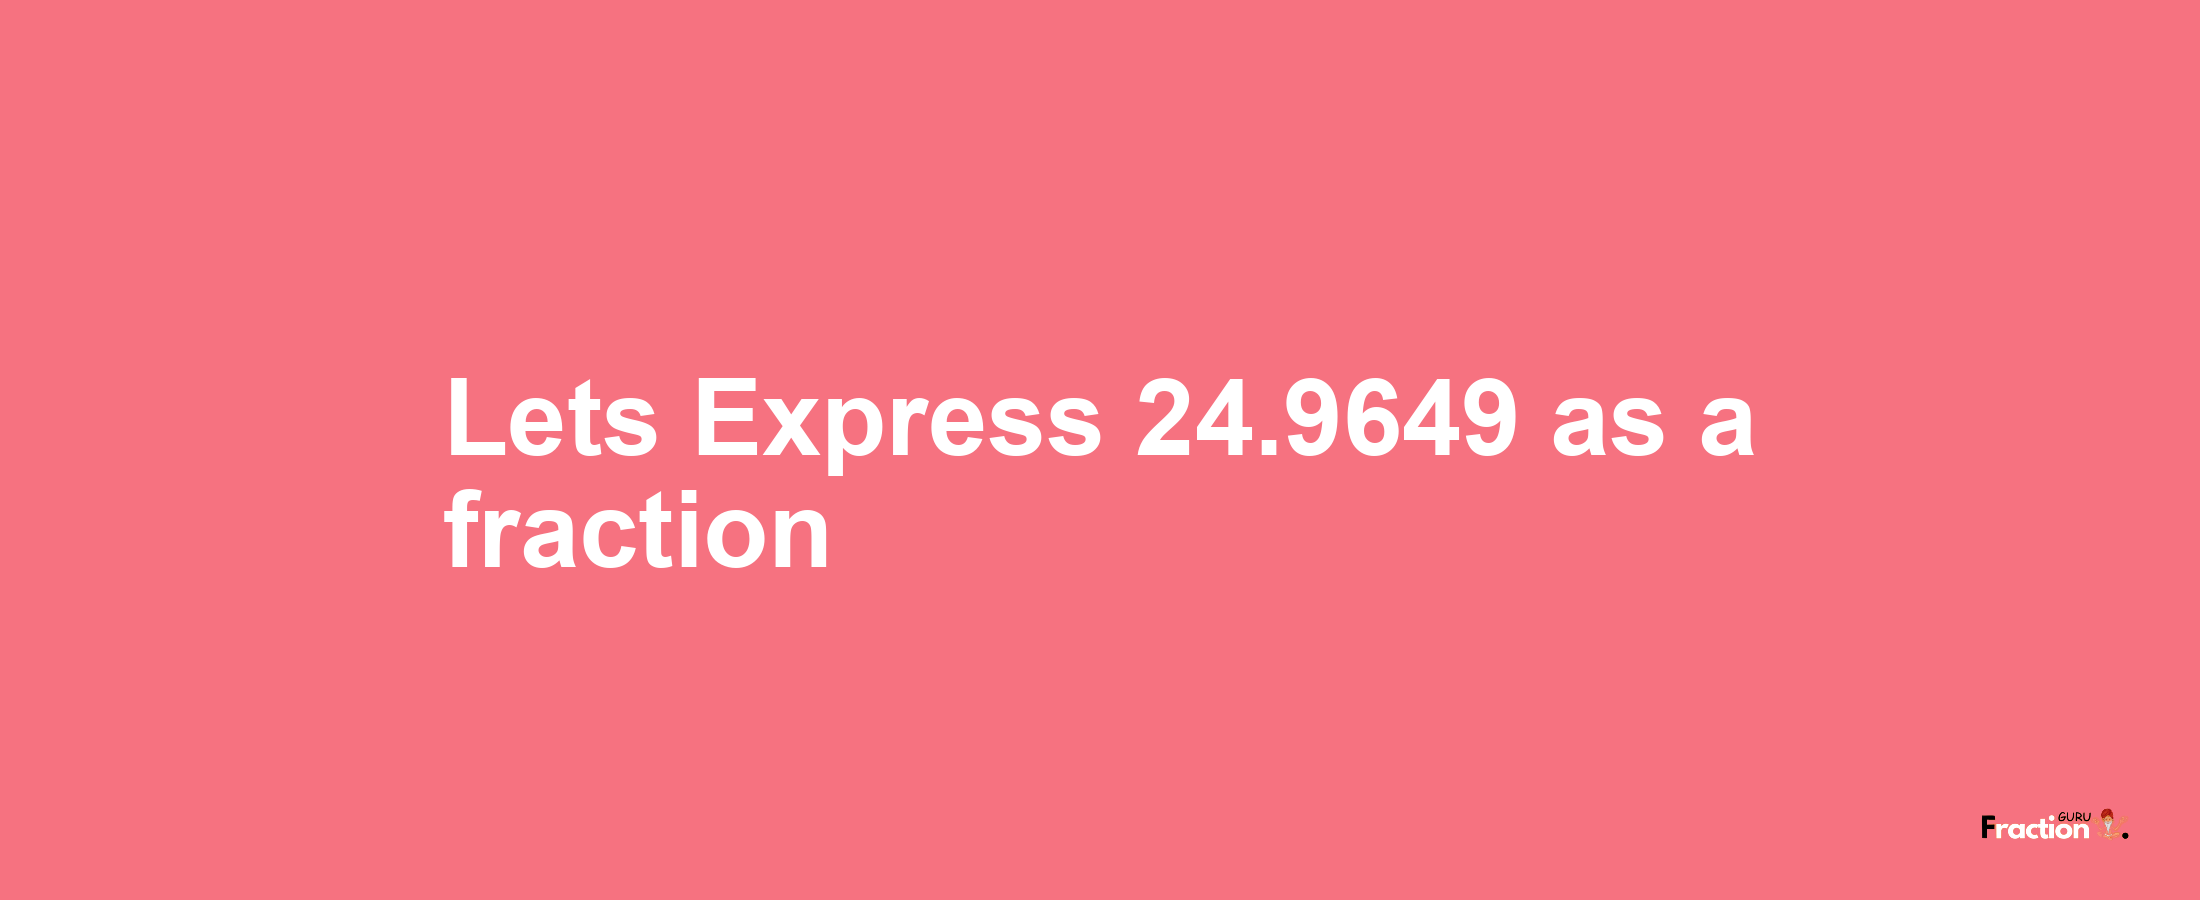 Lets Express 24.9649 as afraction